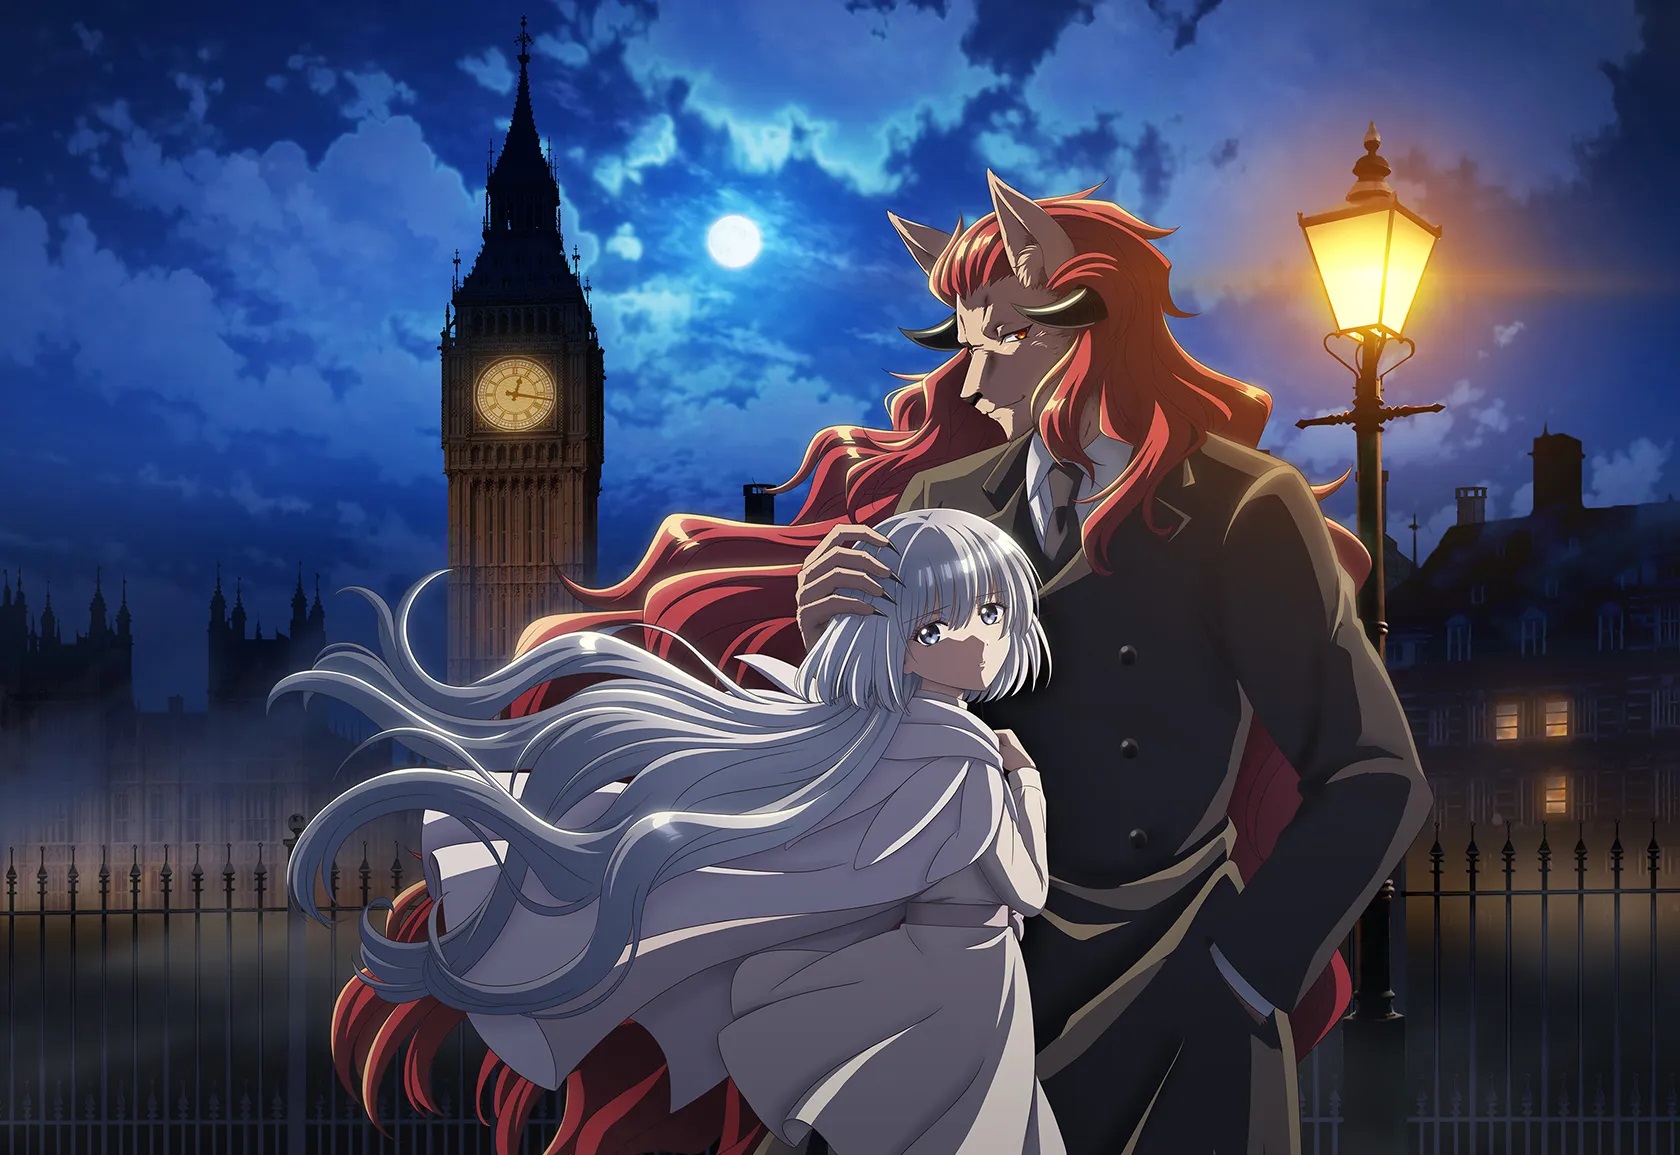 A teaser visual for the upcoming anime adaptation of The Tale of the Outcasts featuring the main characters, Wisteria and Marbas, sharing an intimate moment beneath the gaslamps of London on a dark night illuminated by the full moon. Big Ben is visible in the background.